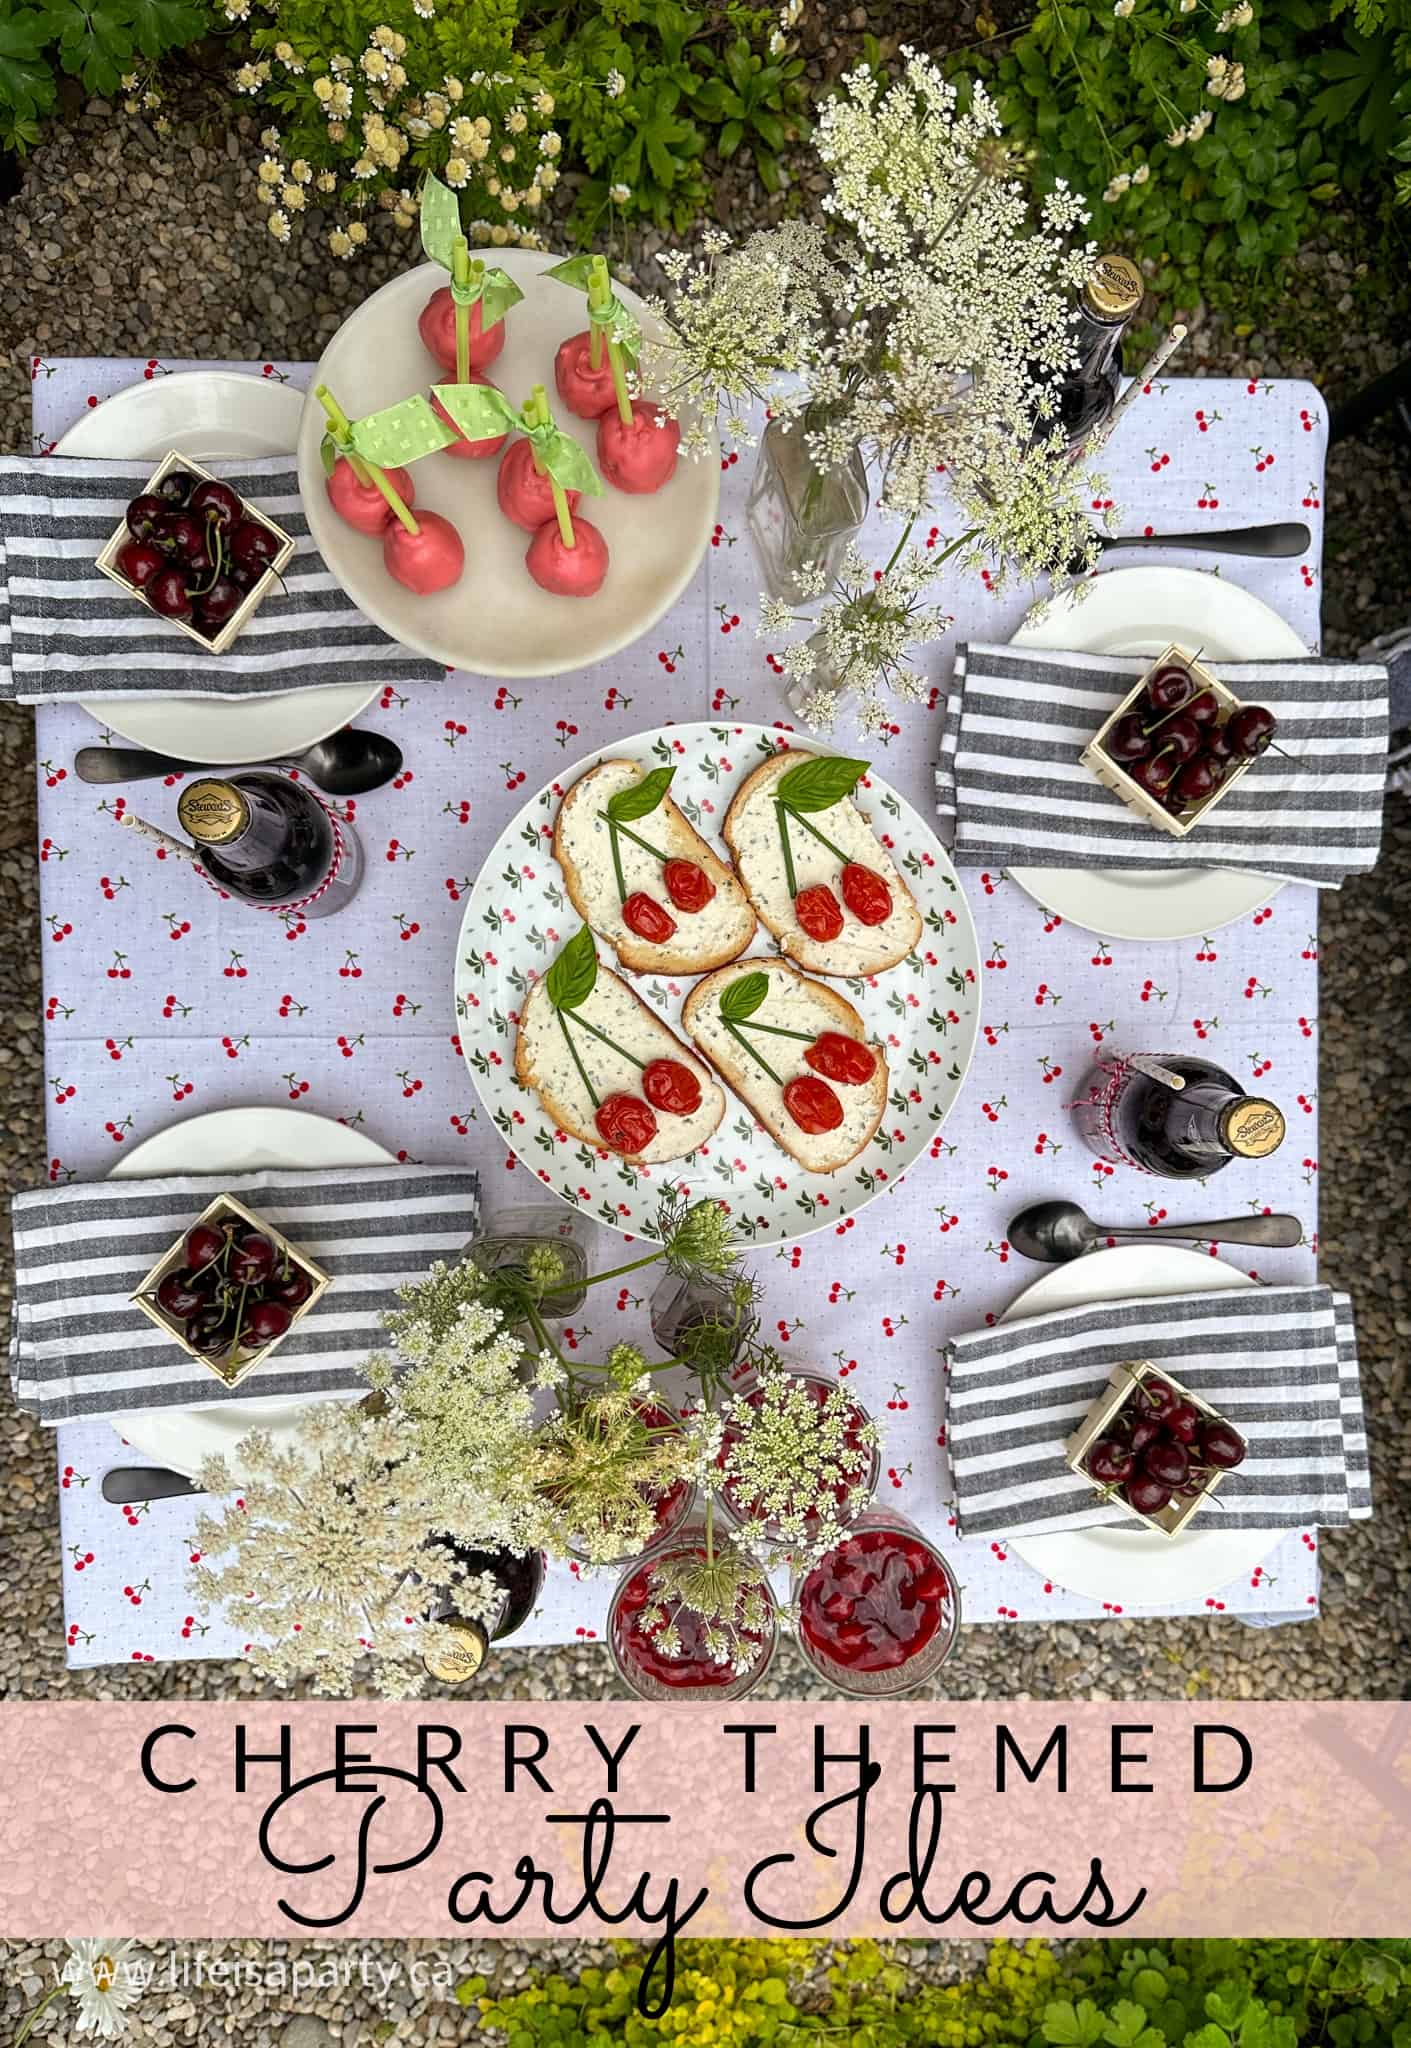 cherry themed party ideas